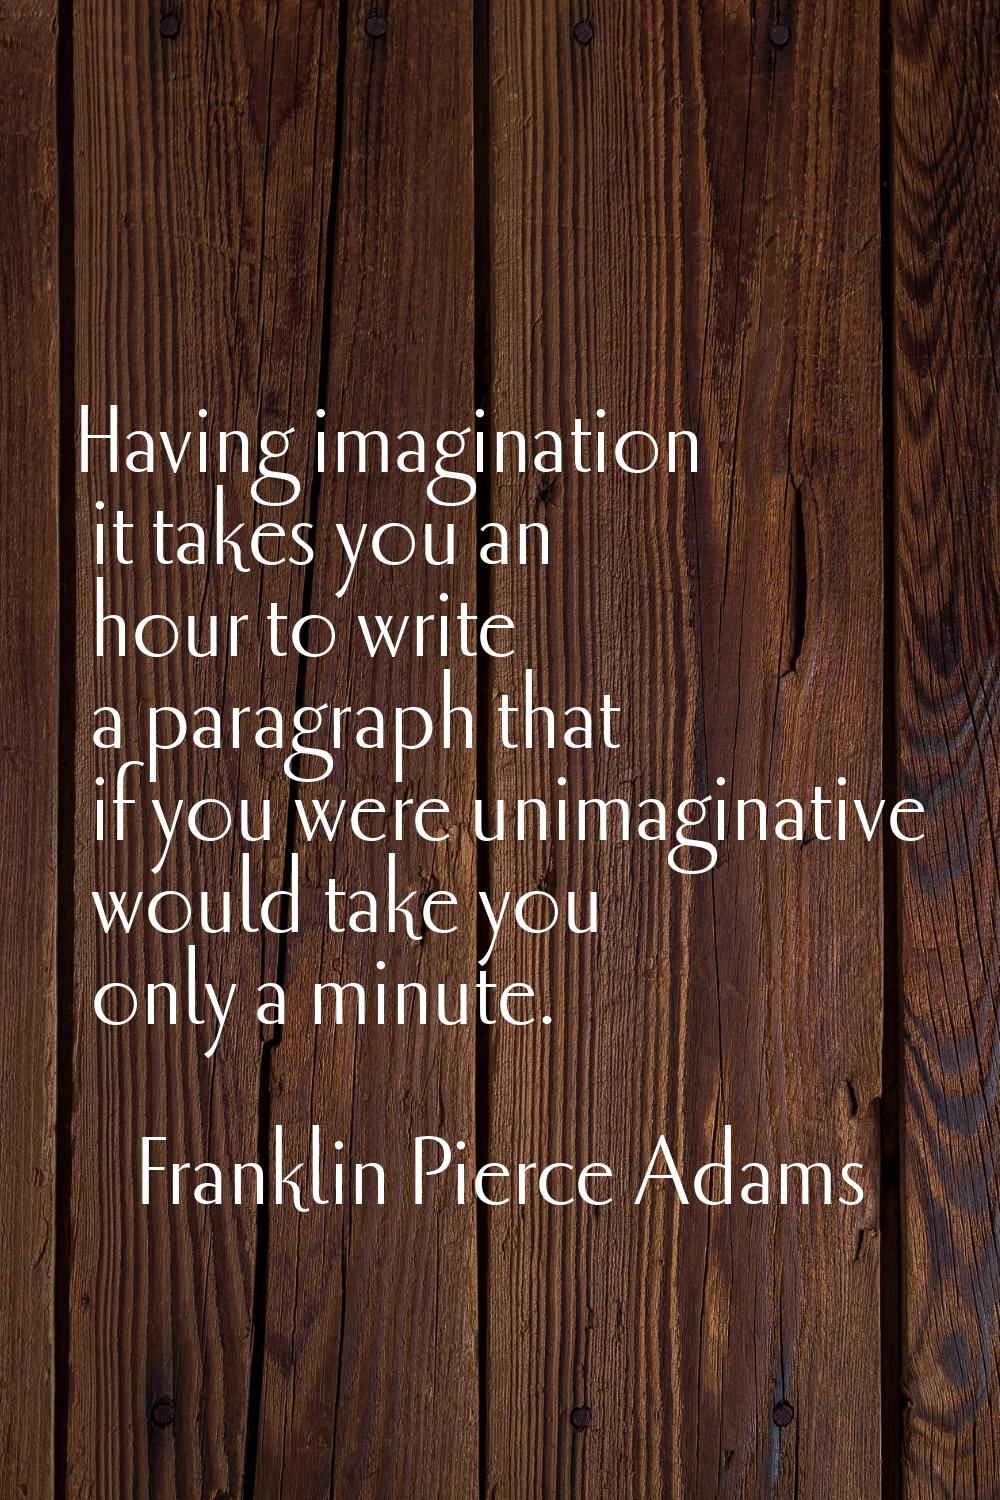 Having imagination it takes you an hour to write a paragraph that if you were unimaginative would t